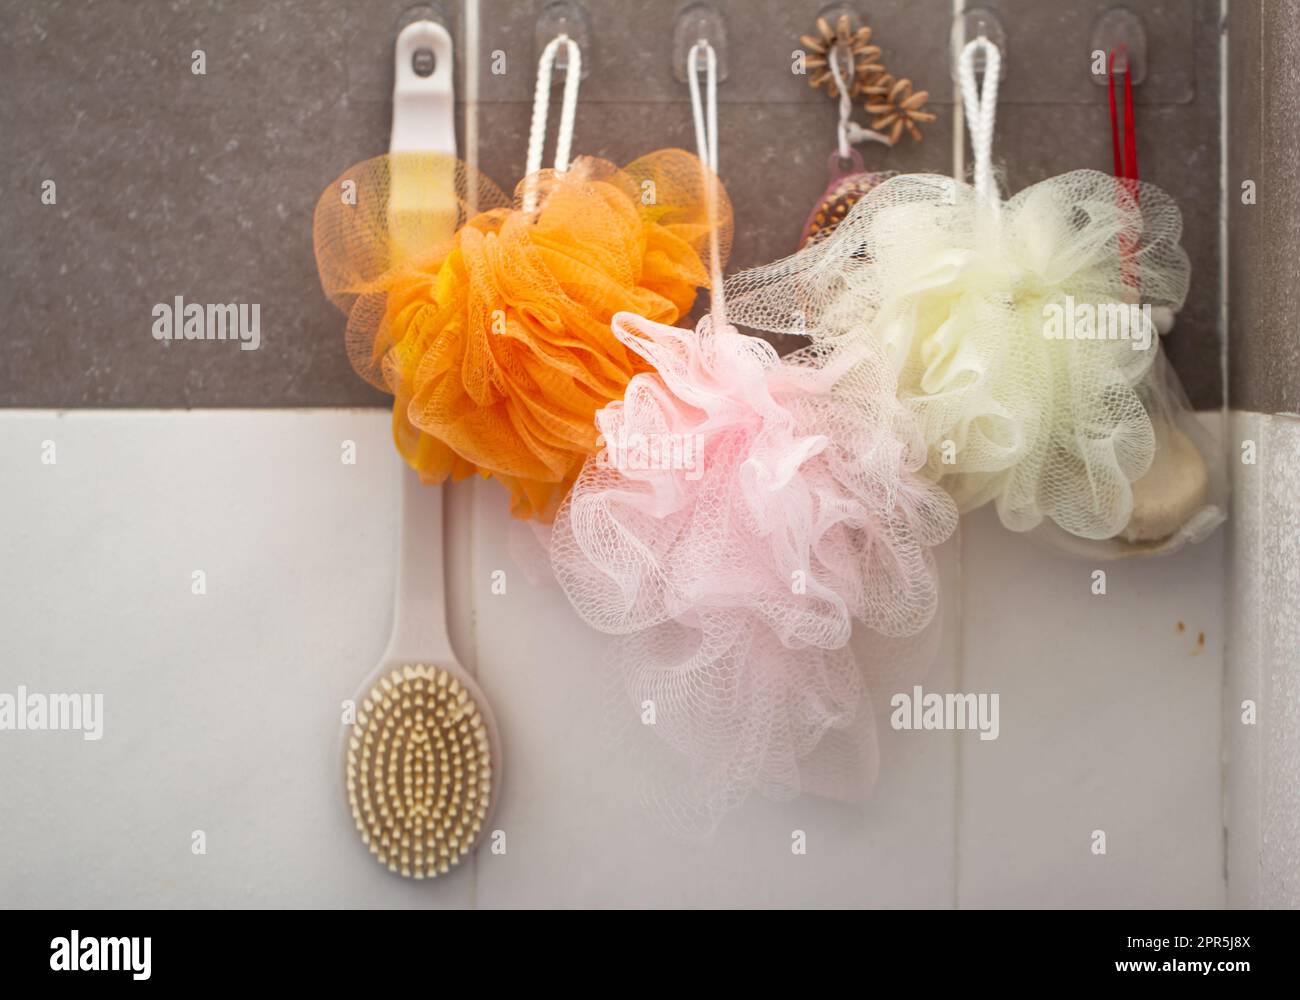 Bath sponges used for body wash and to exfoliate body skin during bathing Stock Photo